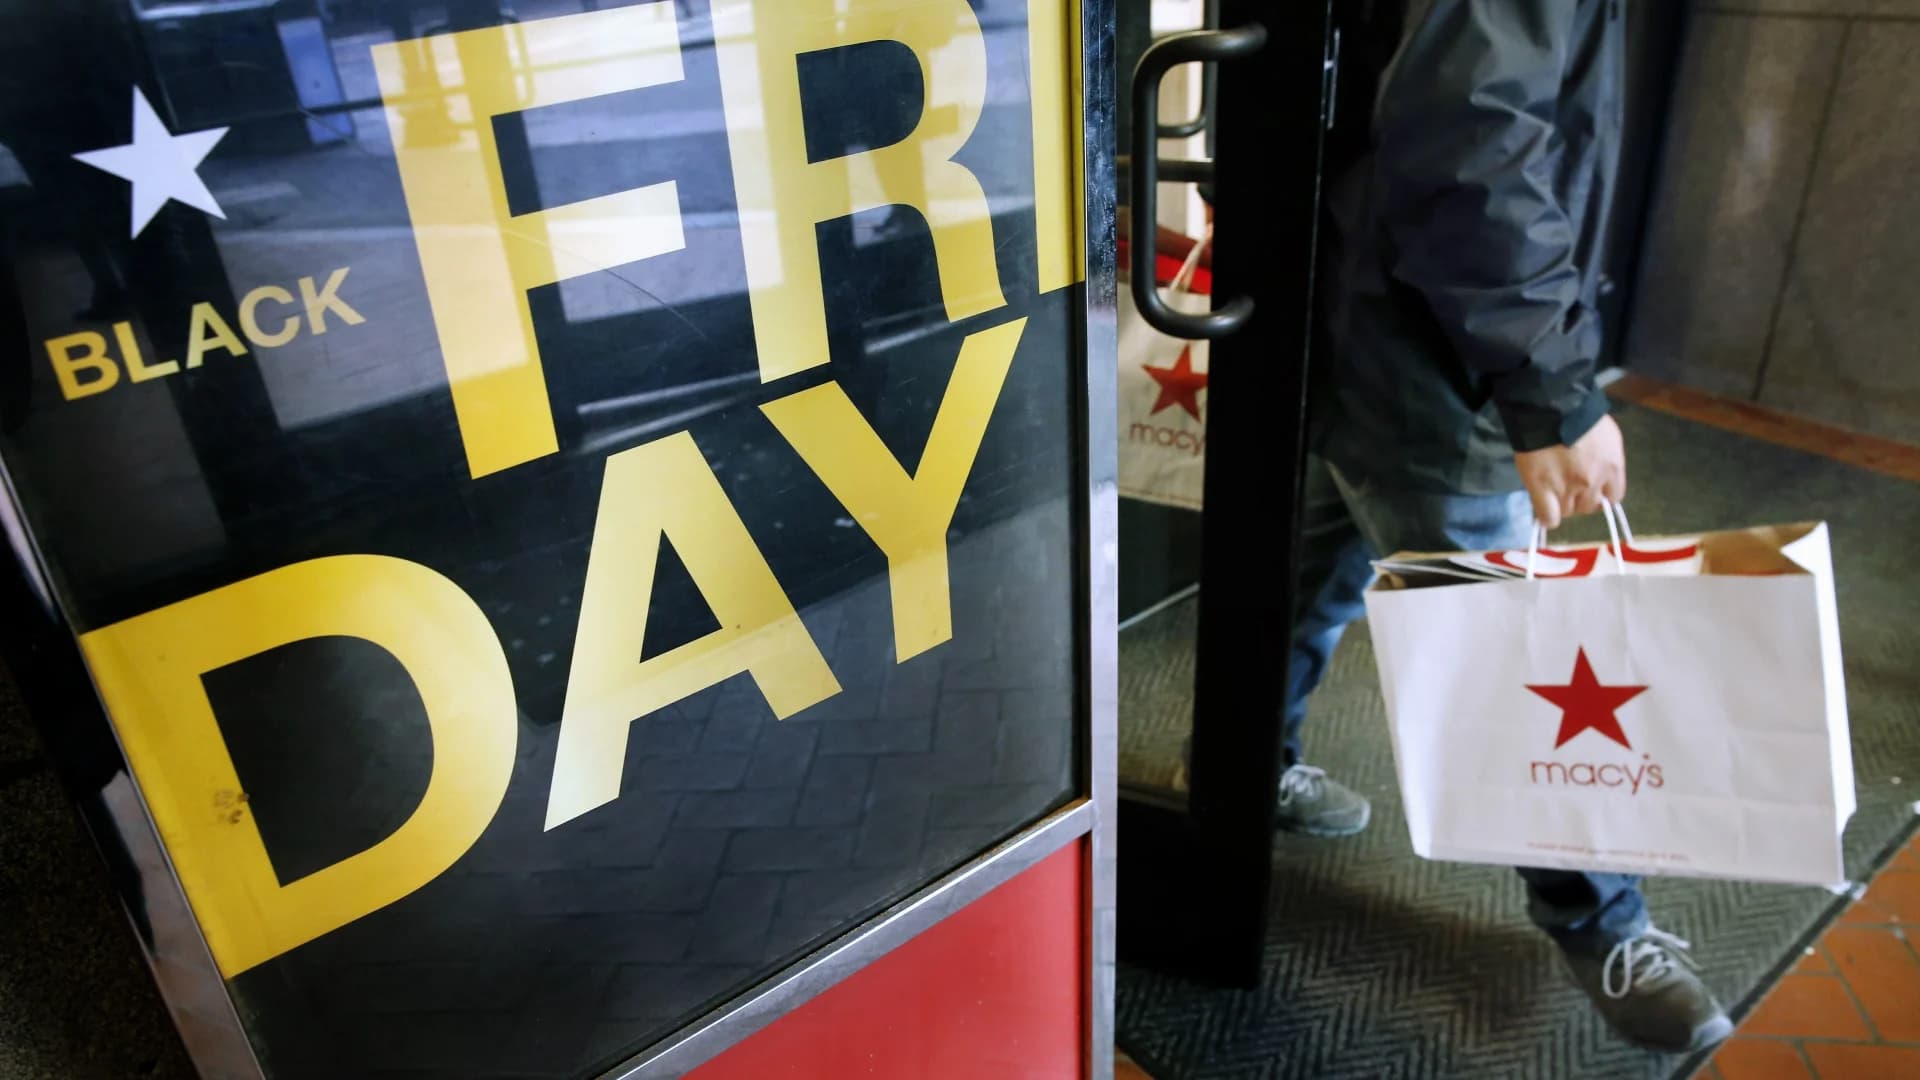 Curbside pickup or in-person shopping? Here are 15 tips to shop safely on Black Friday